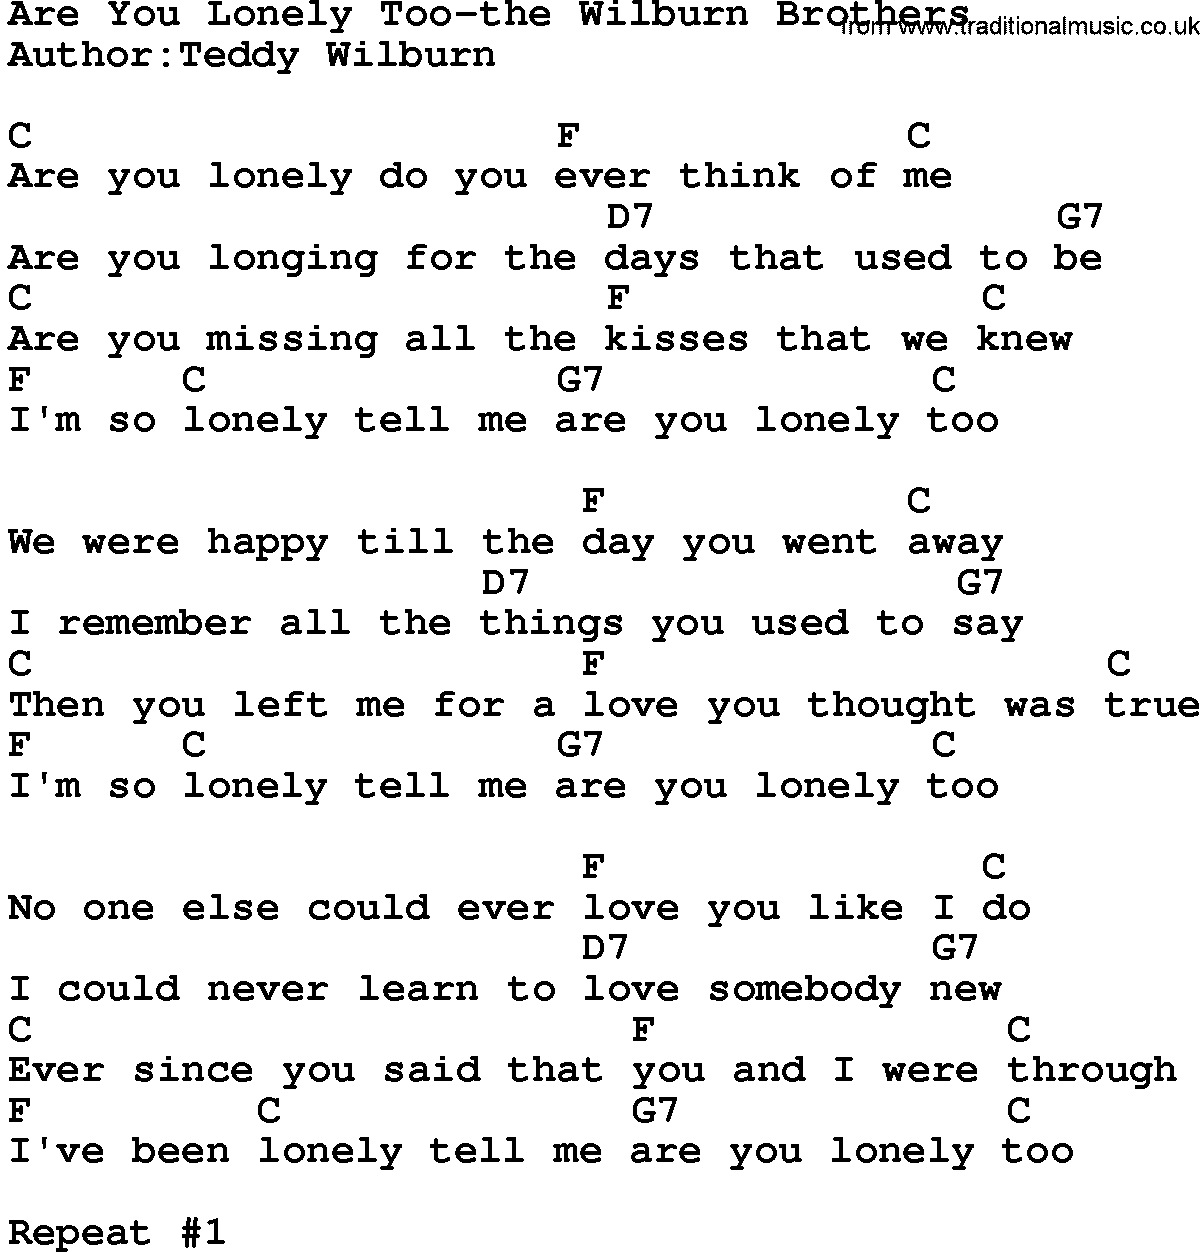 Country music song: Are You Lonely Too-The Wilburn Brothers lyrics and chords